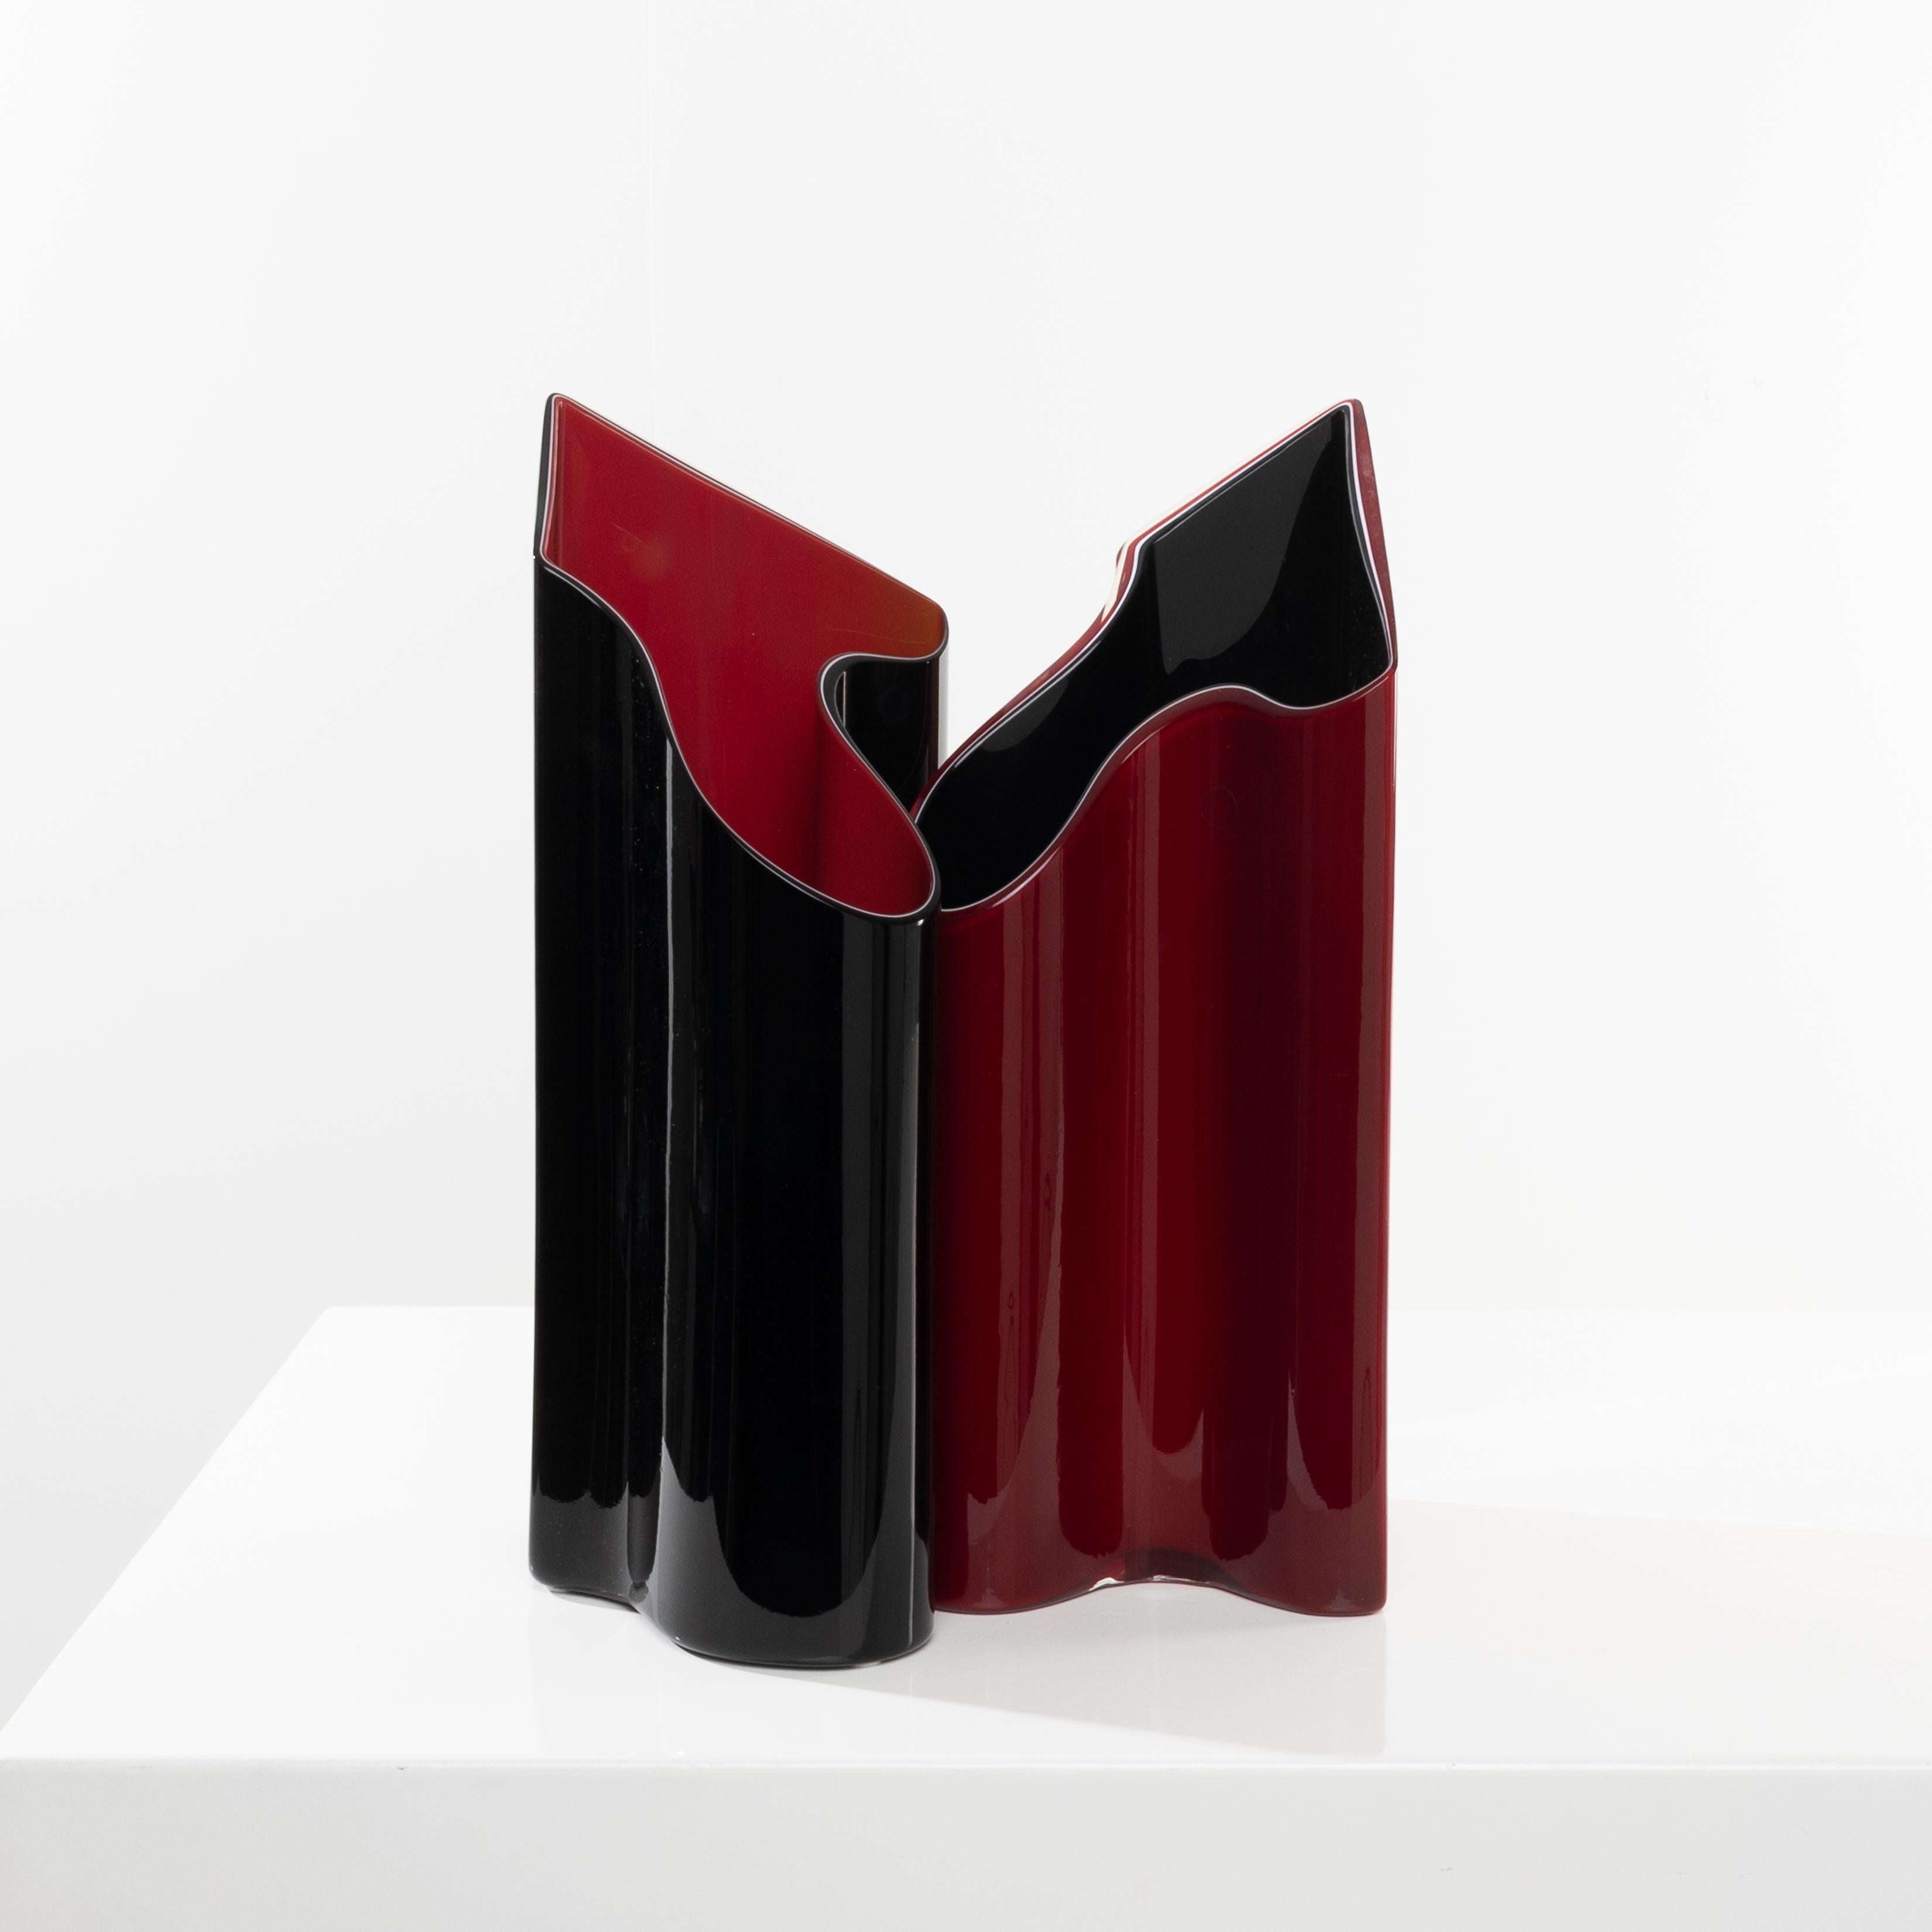 Pair of vases with inverted colors.
For the first vase: The exterior is bright red and the interior is deep black. Between these two layers, there is a thin line of white glass, which gives depth to the two main shades.
For the second vase: The